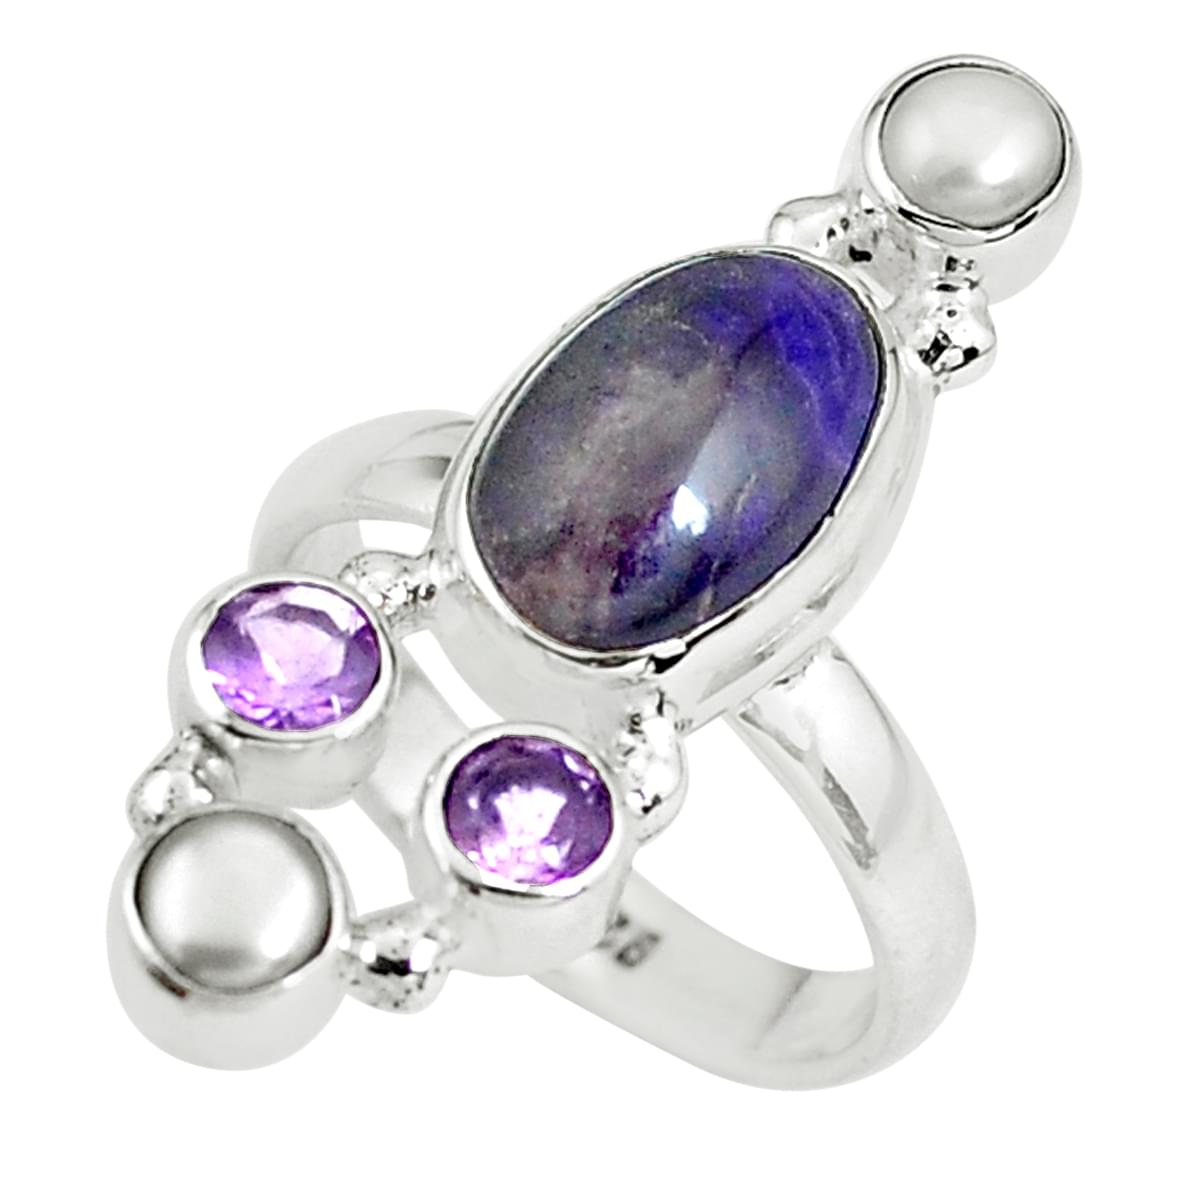 Details about   Heart Purple Amethyst Solitaire 925 Sterling Silver Ring Size 6 7 8 